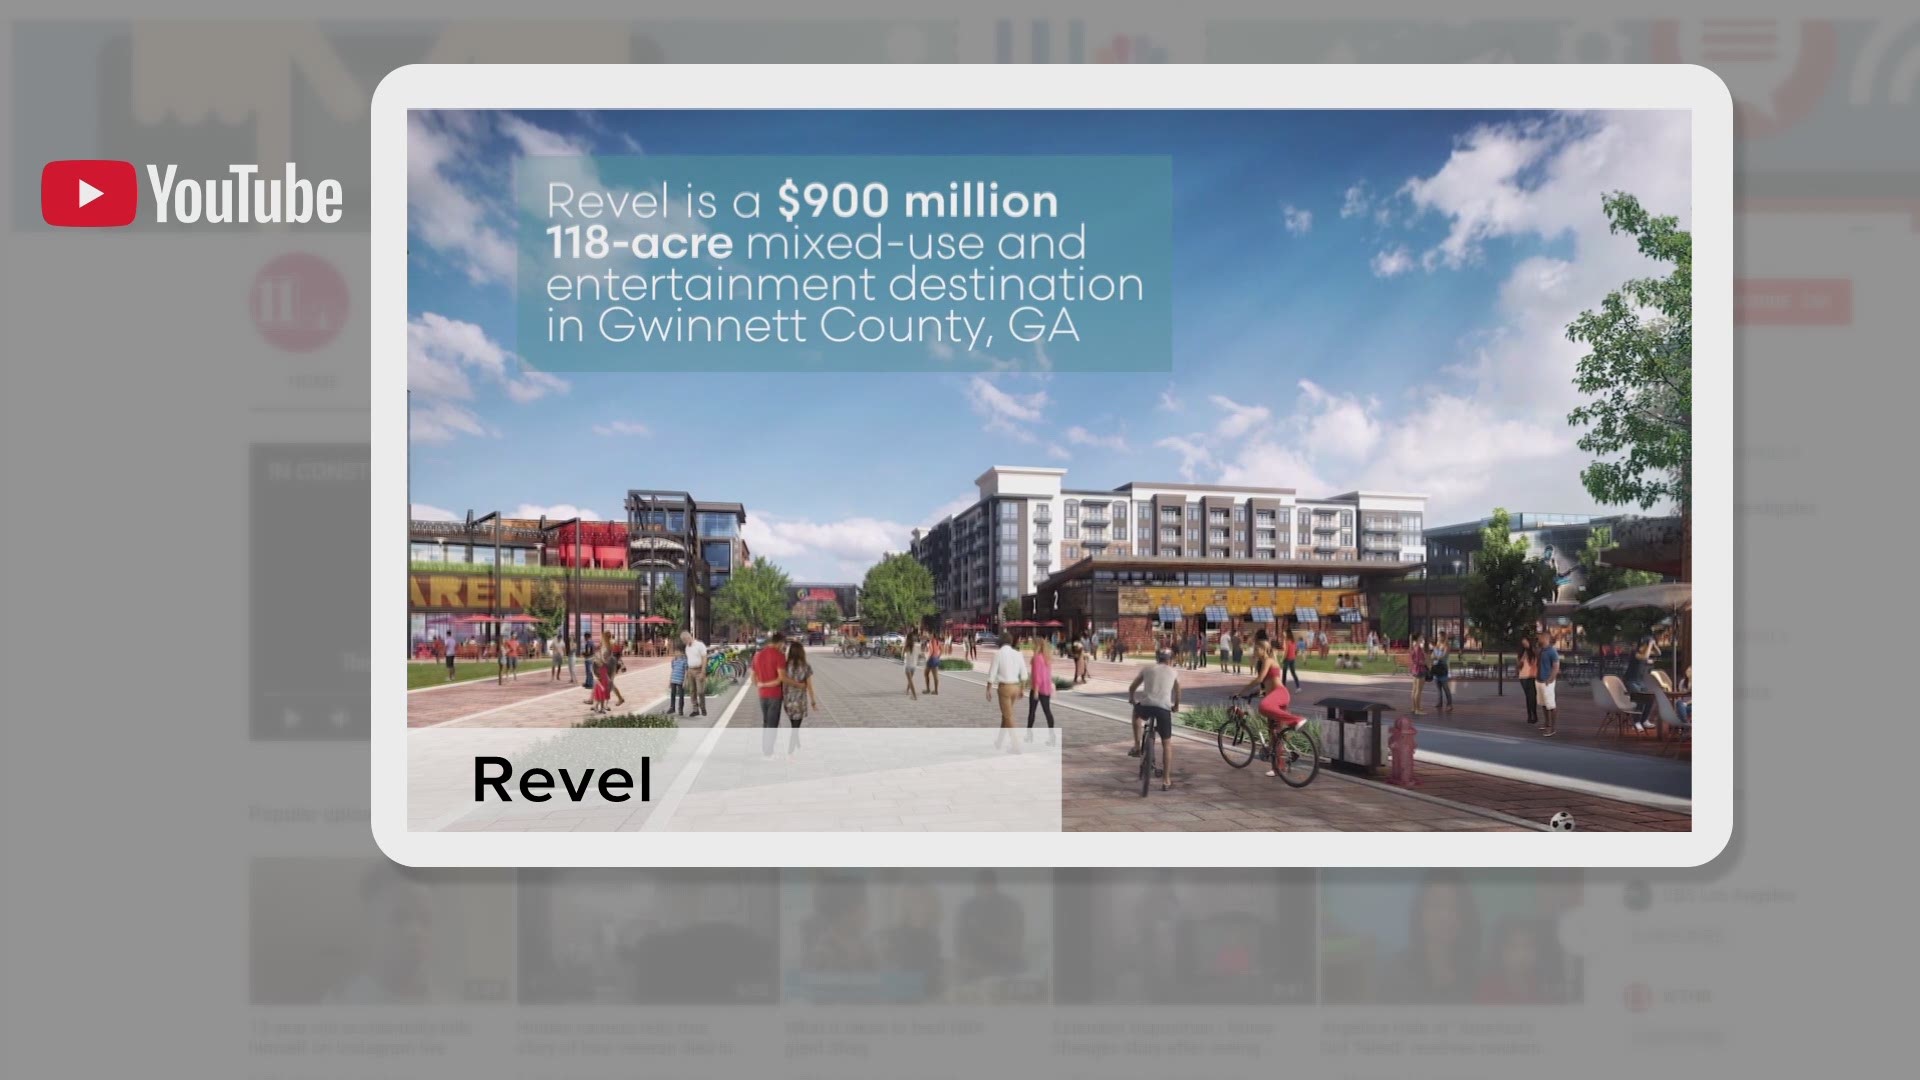 The Gwinnett County Convention and Visitor’s Bureau announced Tuesday that the proposed mixed-use development will not move forward as planned.